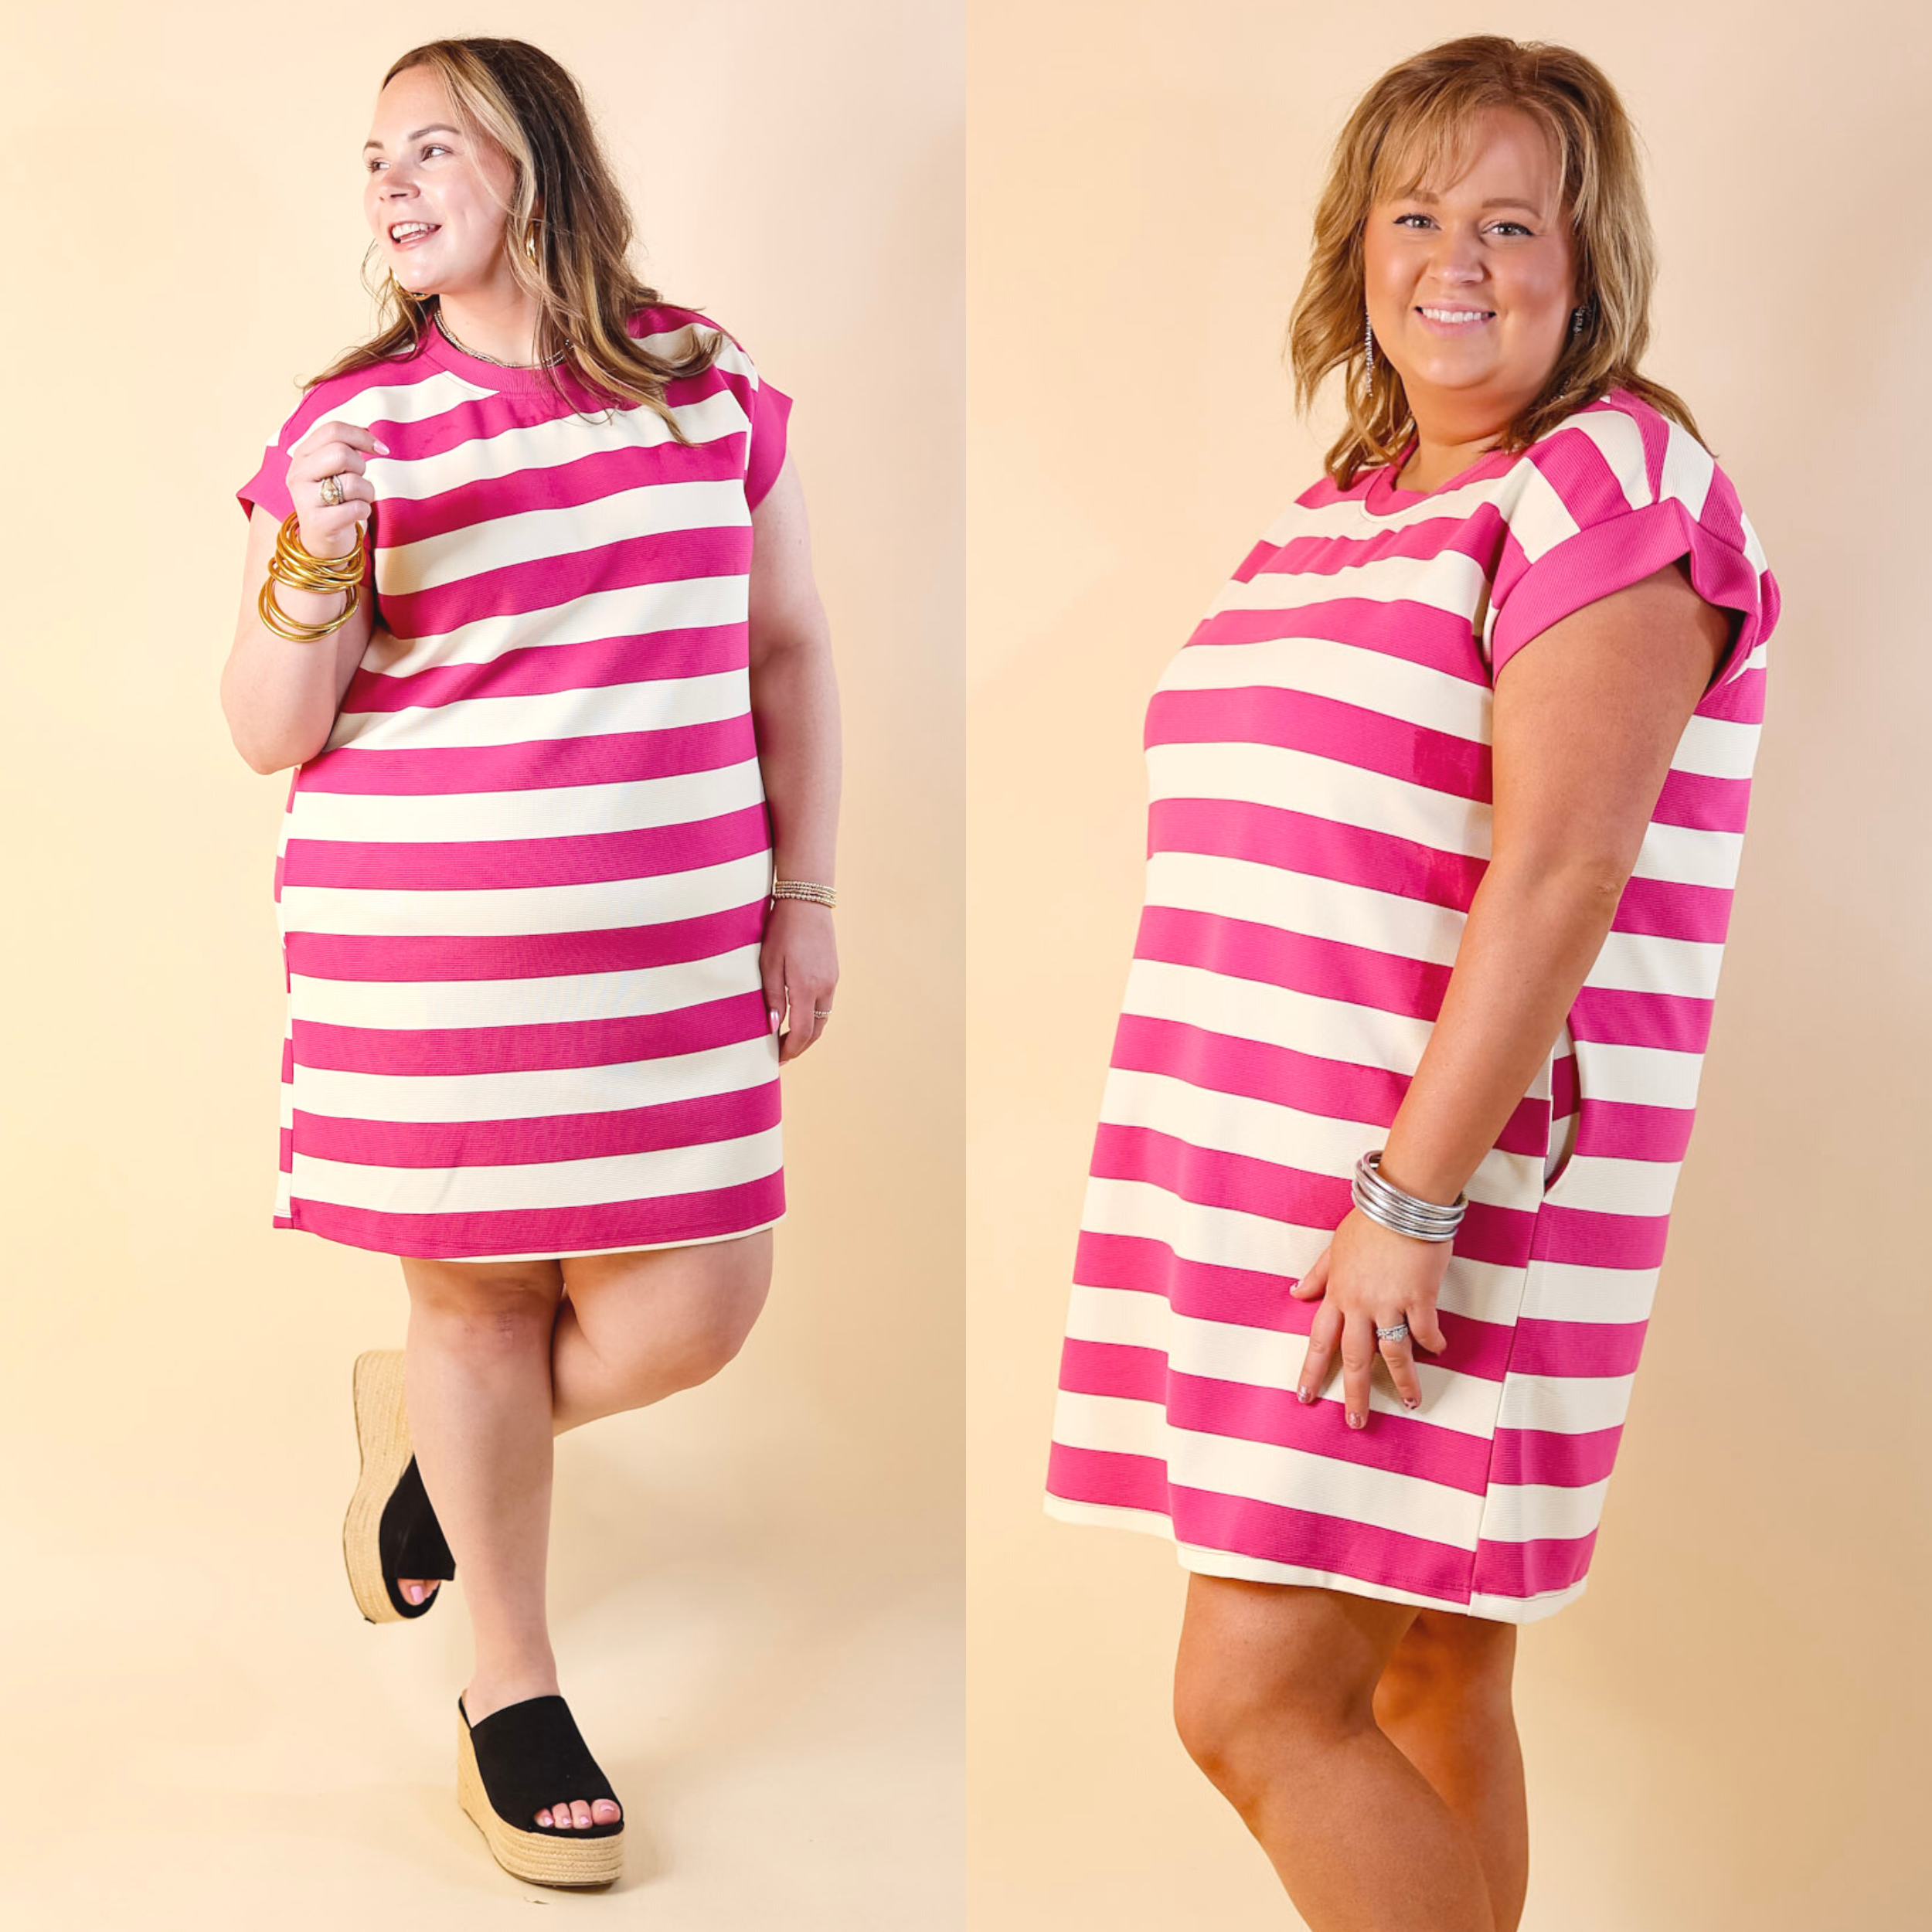 Stripe it Simple Striped Dress with Cap Sleeves in Pink and Cream - Giddy Up Glamour Boutique